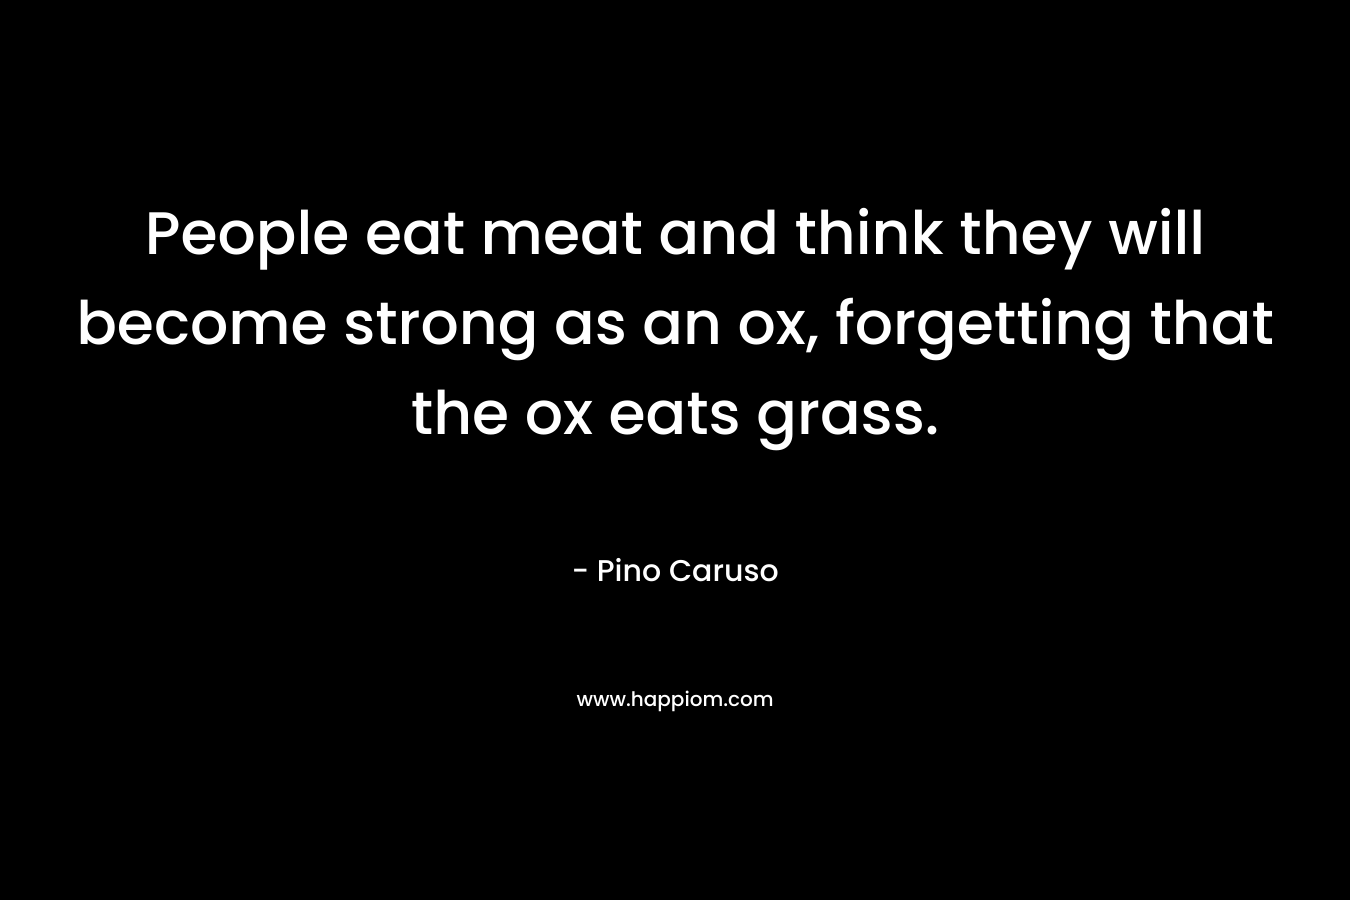 People eat meat and think they will become strong as an ox, forgetting that the ox eats grass.